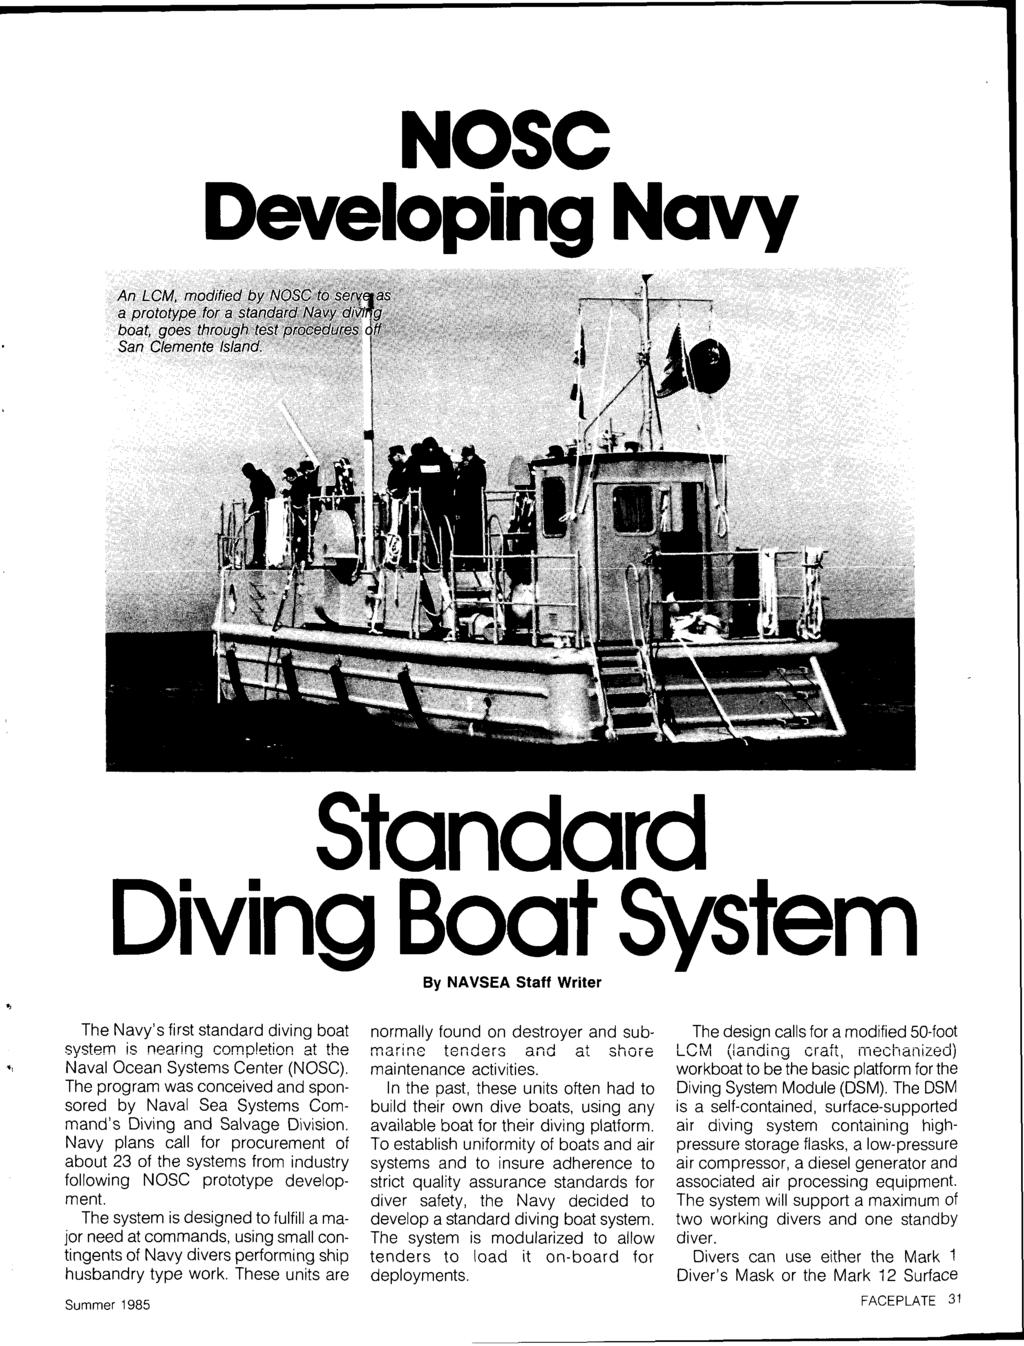 NOSC Developing Navy Standard Diving Boat System The Navy's first standard diving boat system is nearing completion